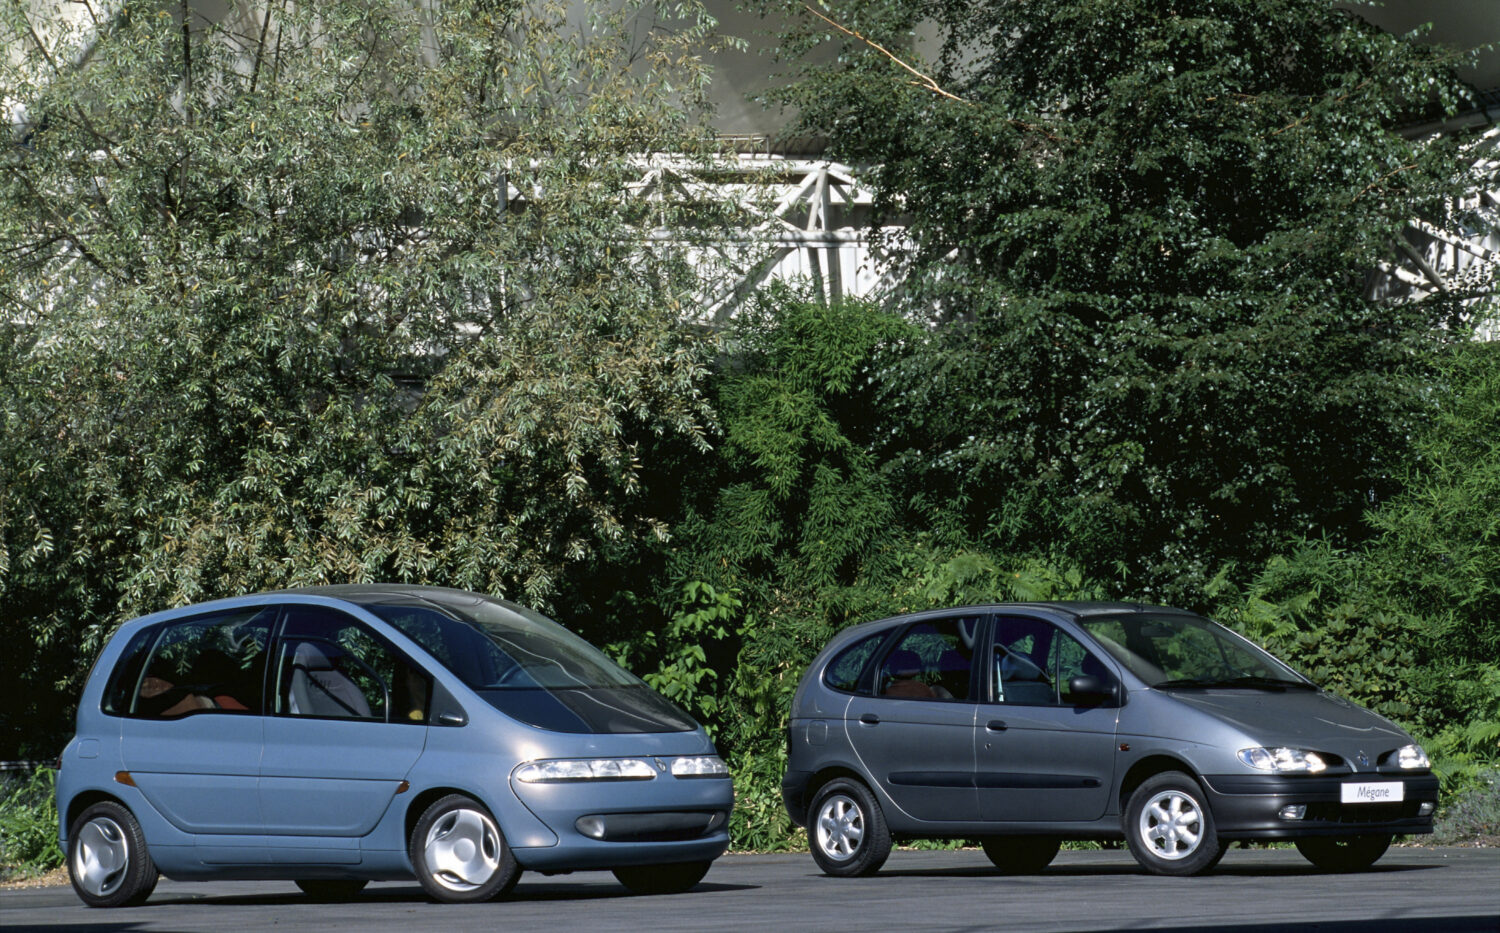 Story Renault Scenic: Invention And Re-Invention - Designed From The Inside Out (Episode 1)